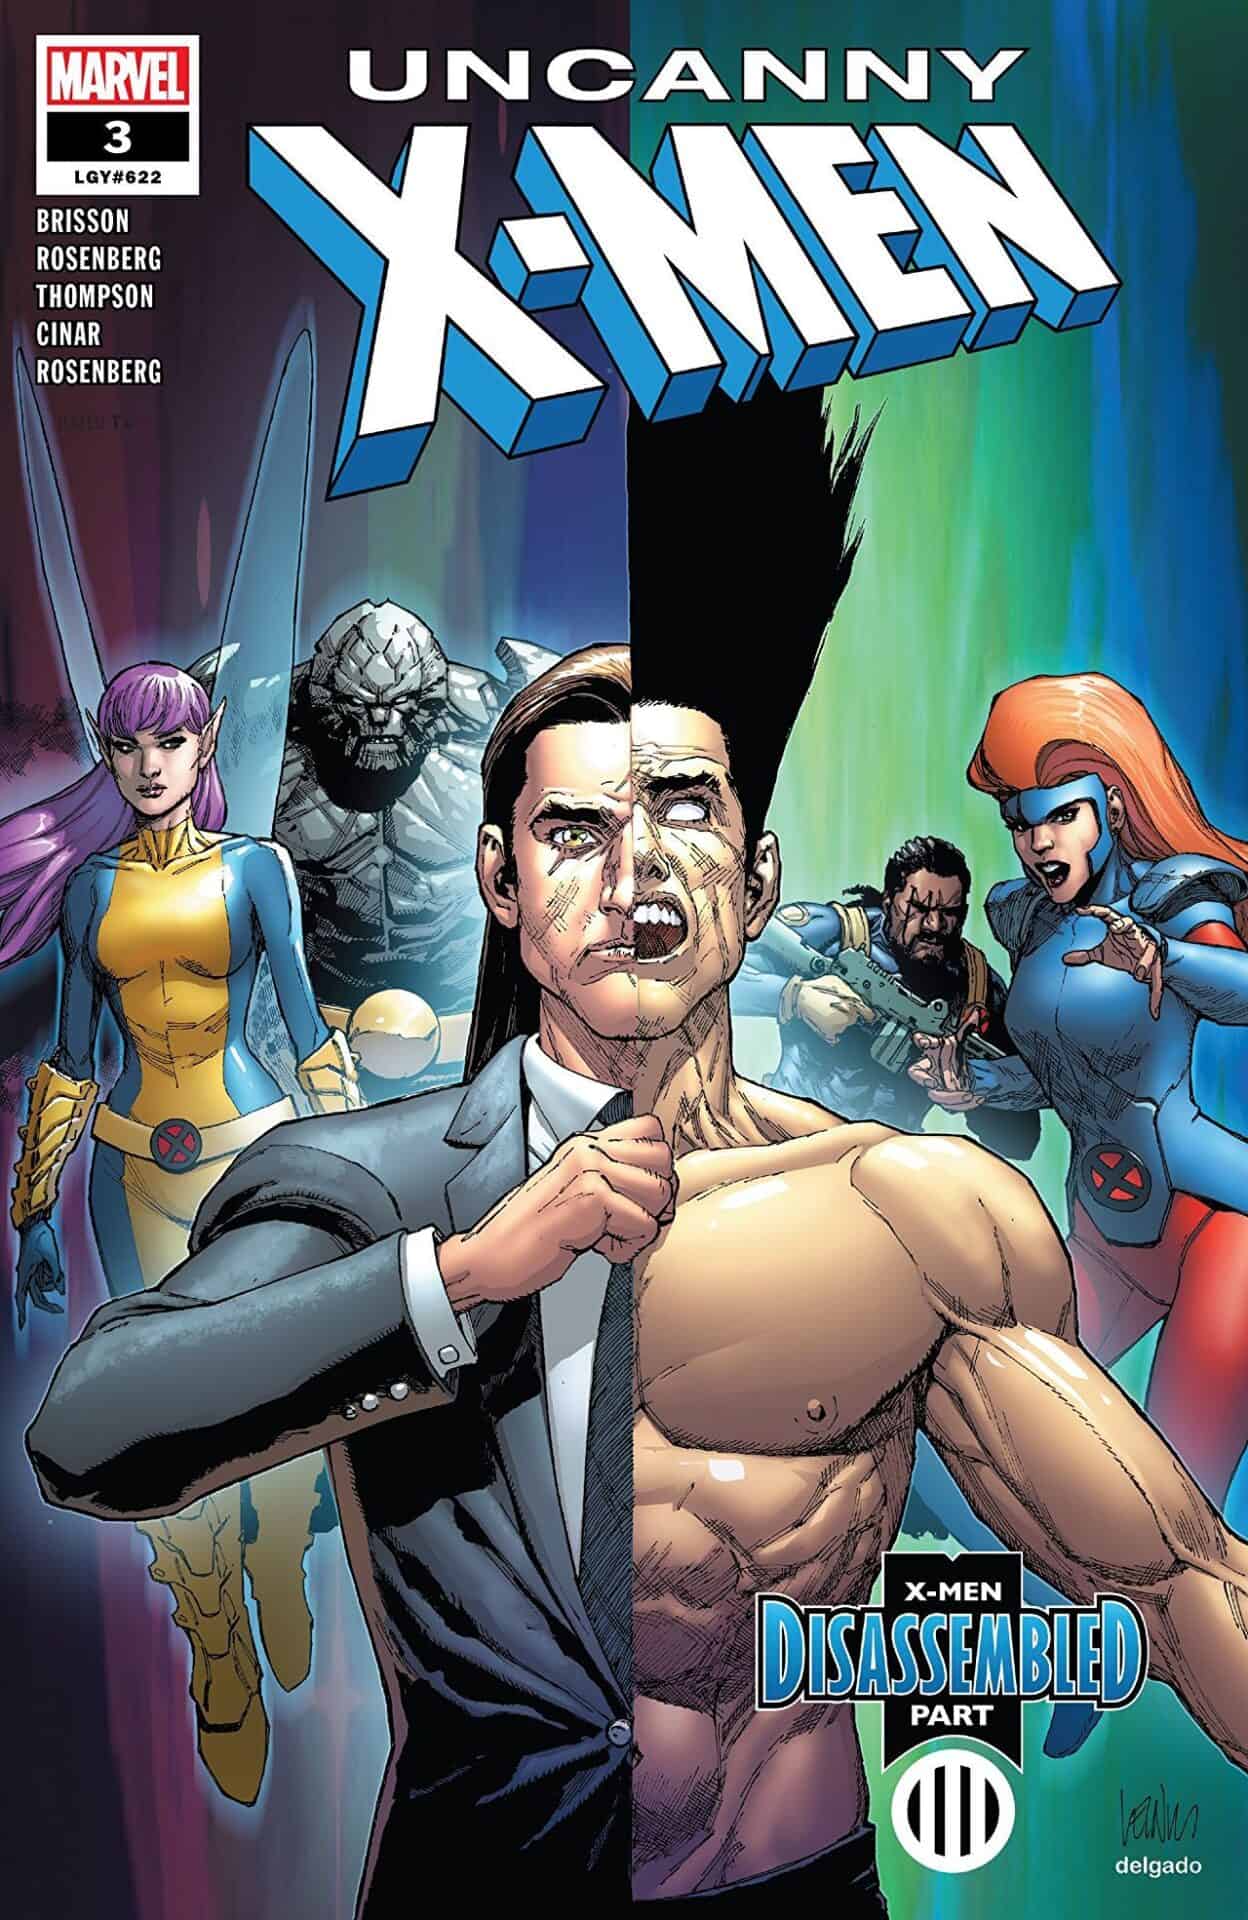 Marvel Comics Universe Uncanny X Men 3 Spoilers X Men Disassembled Part 3 Has Return Of The Missing As The Horseman Of Apocalypse Salvation For Nate Grey X Man Plus Madrox Legion Twist